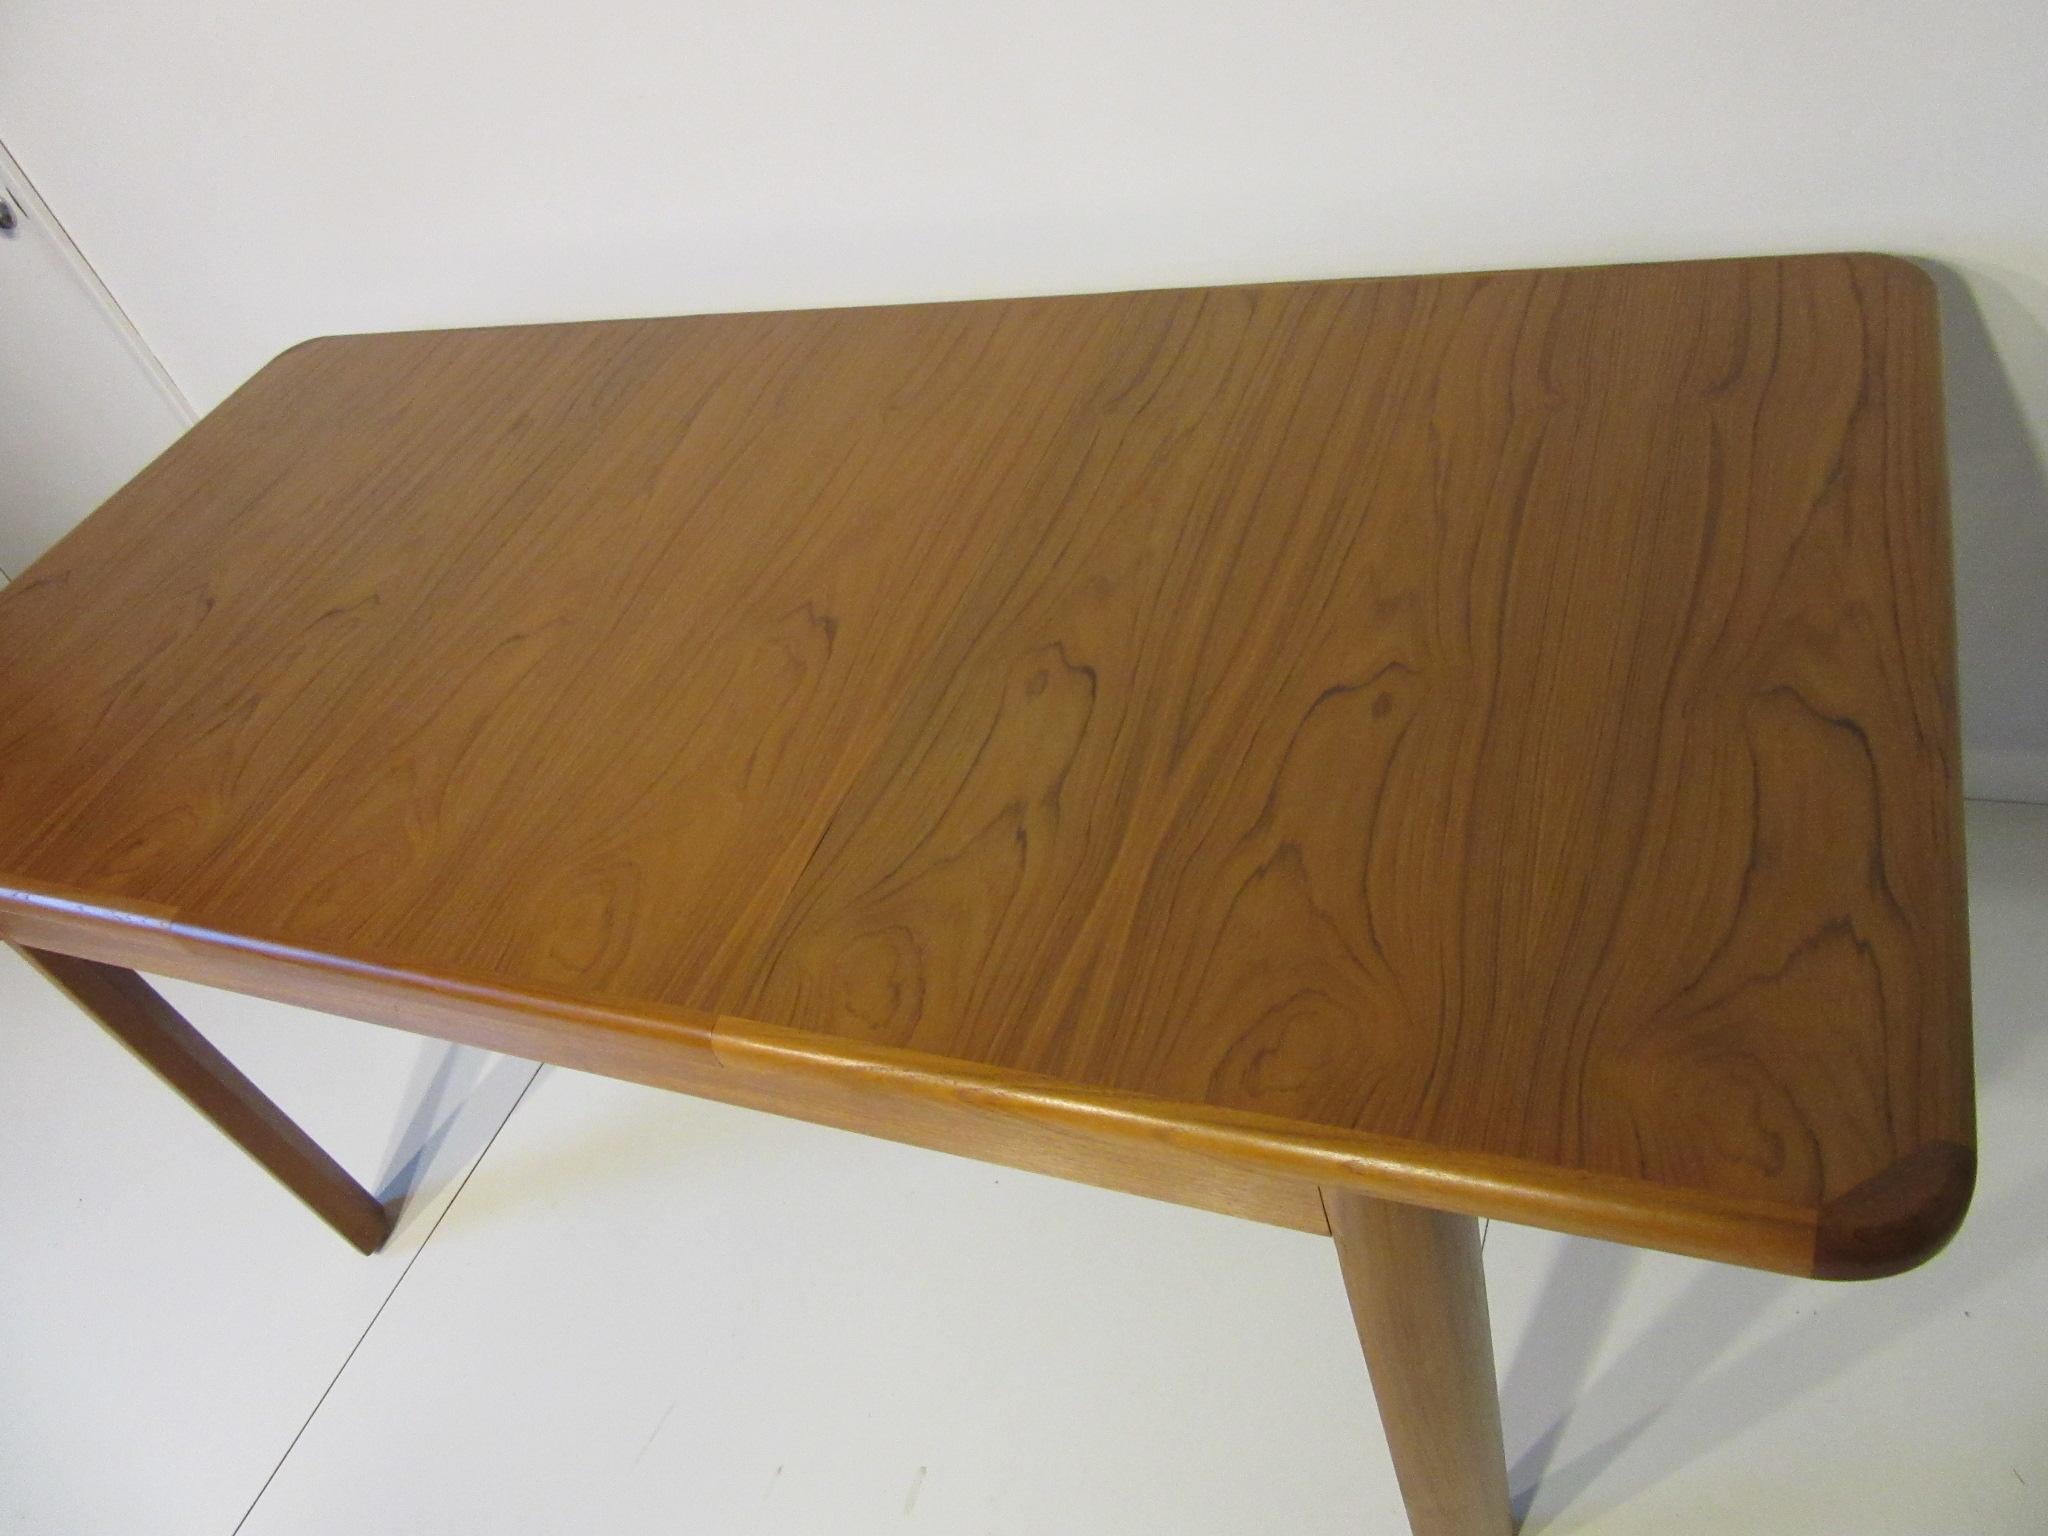 Canadian Teak Wood Dining Table by the Nordic Furniture Company